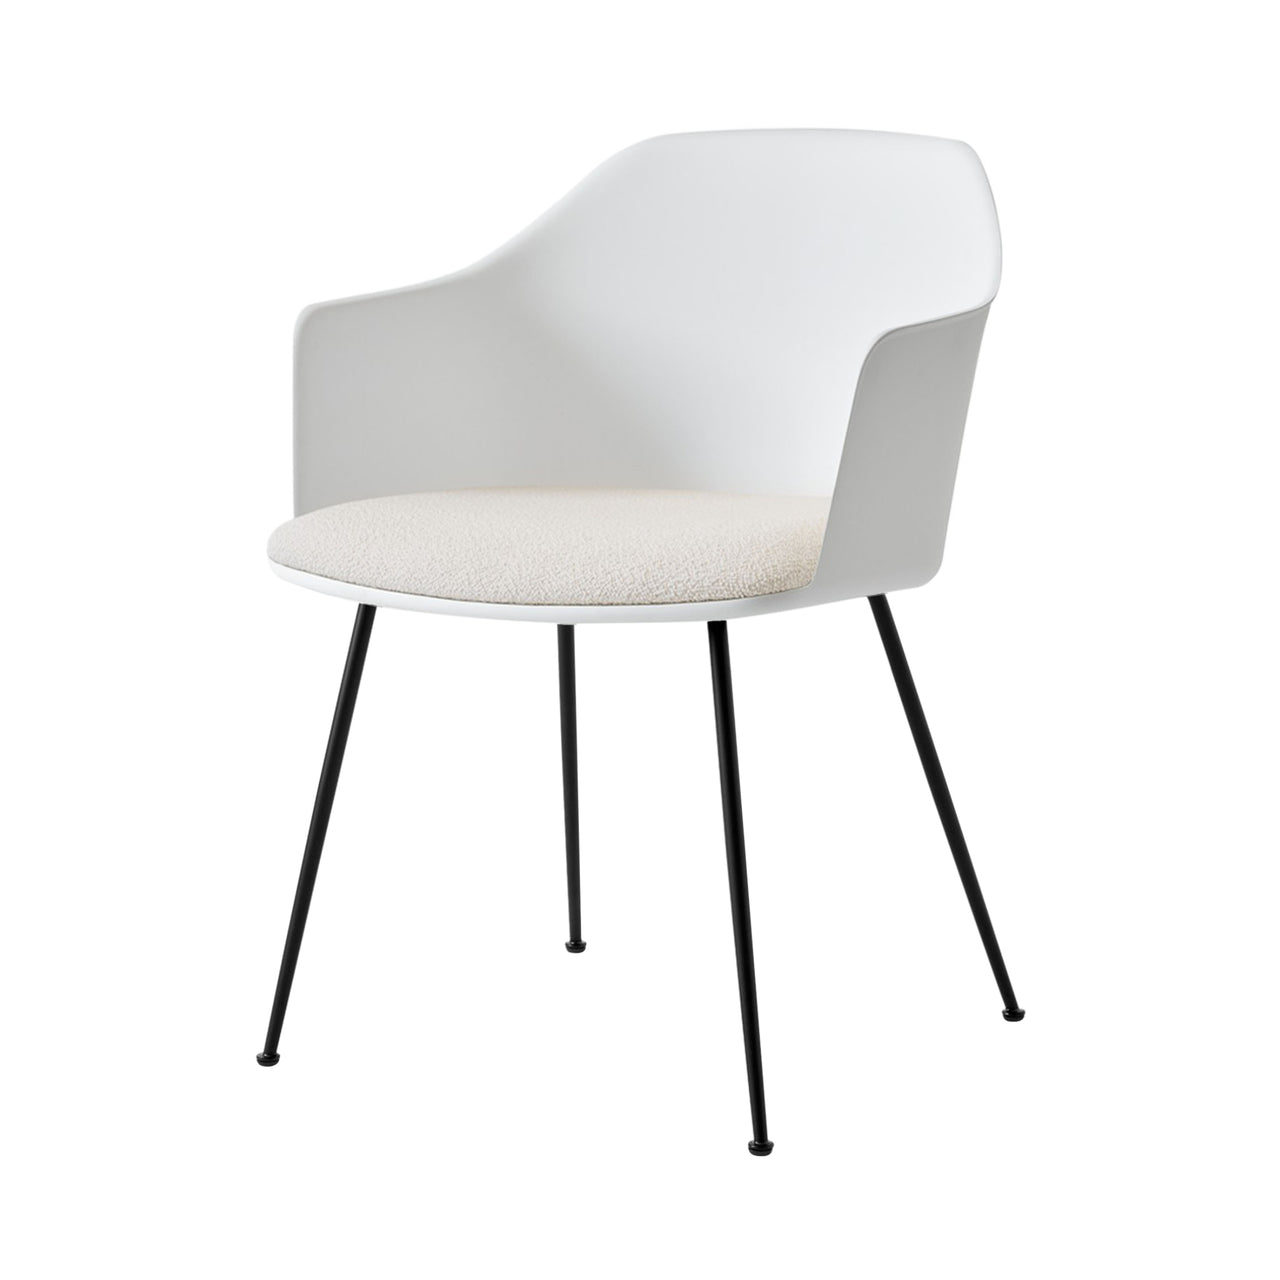 Rely Chair HW34: White + Black